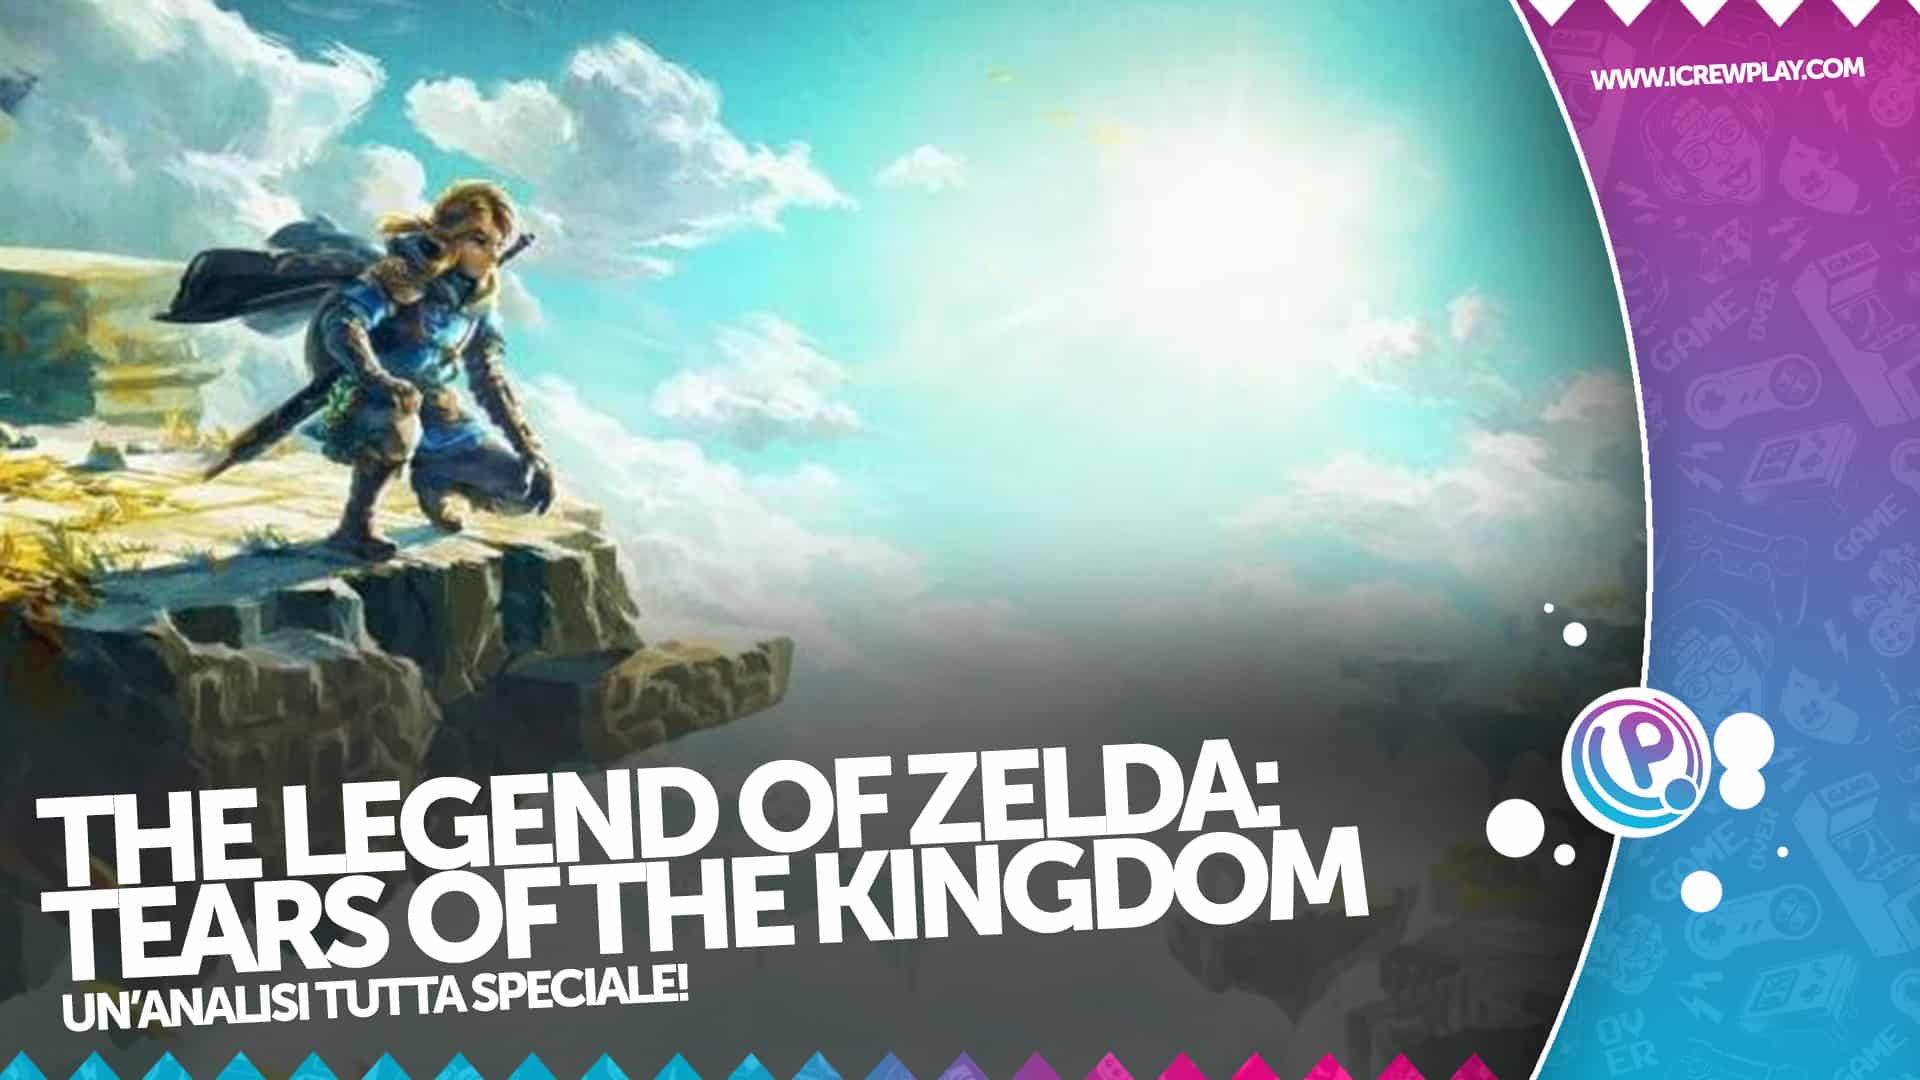 Analisi di The Legend of Zelda Tears of The Kingdom 22